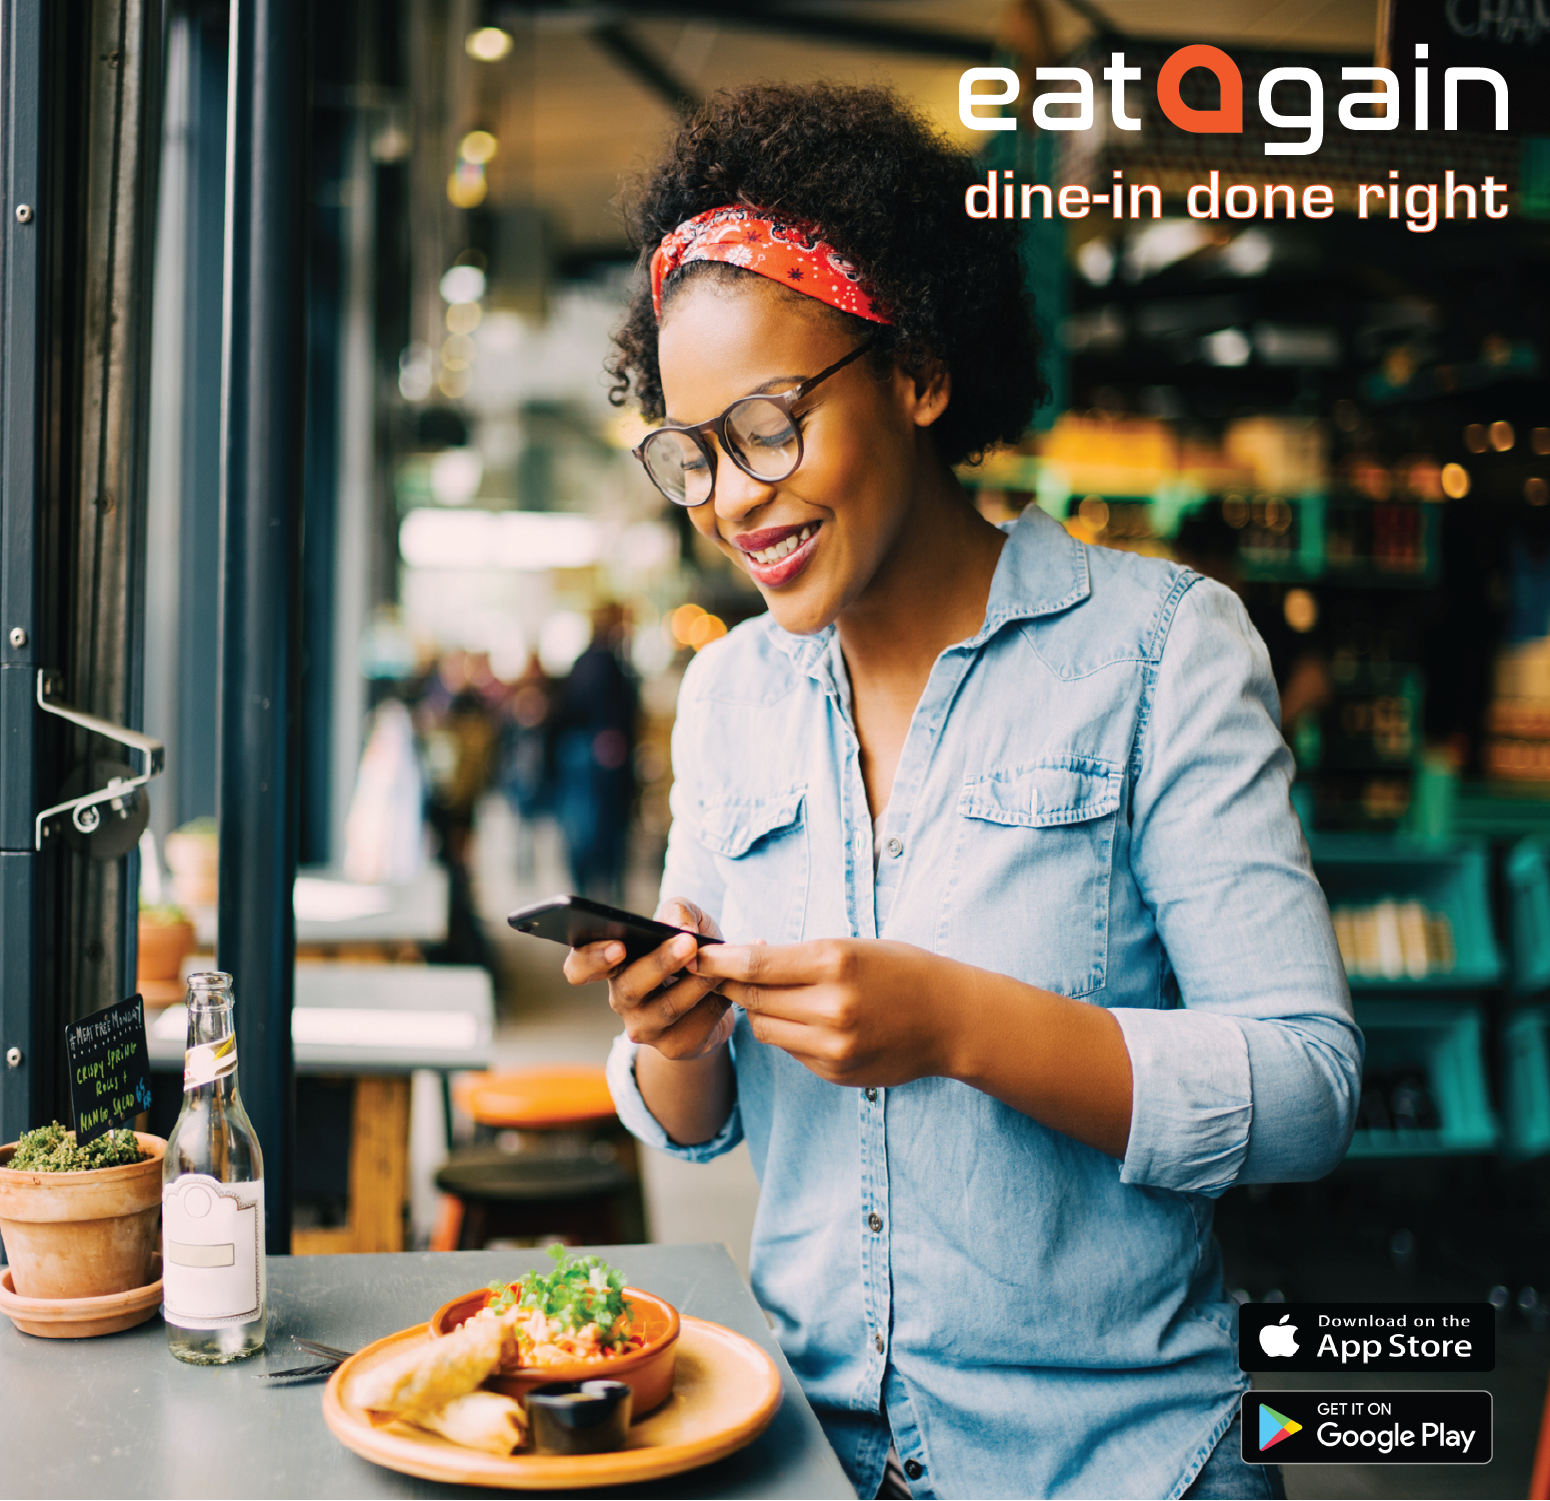 EatAgain - a New Way to Dine-In | Newswire